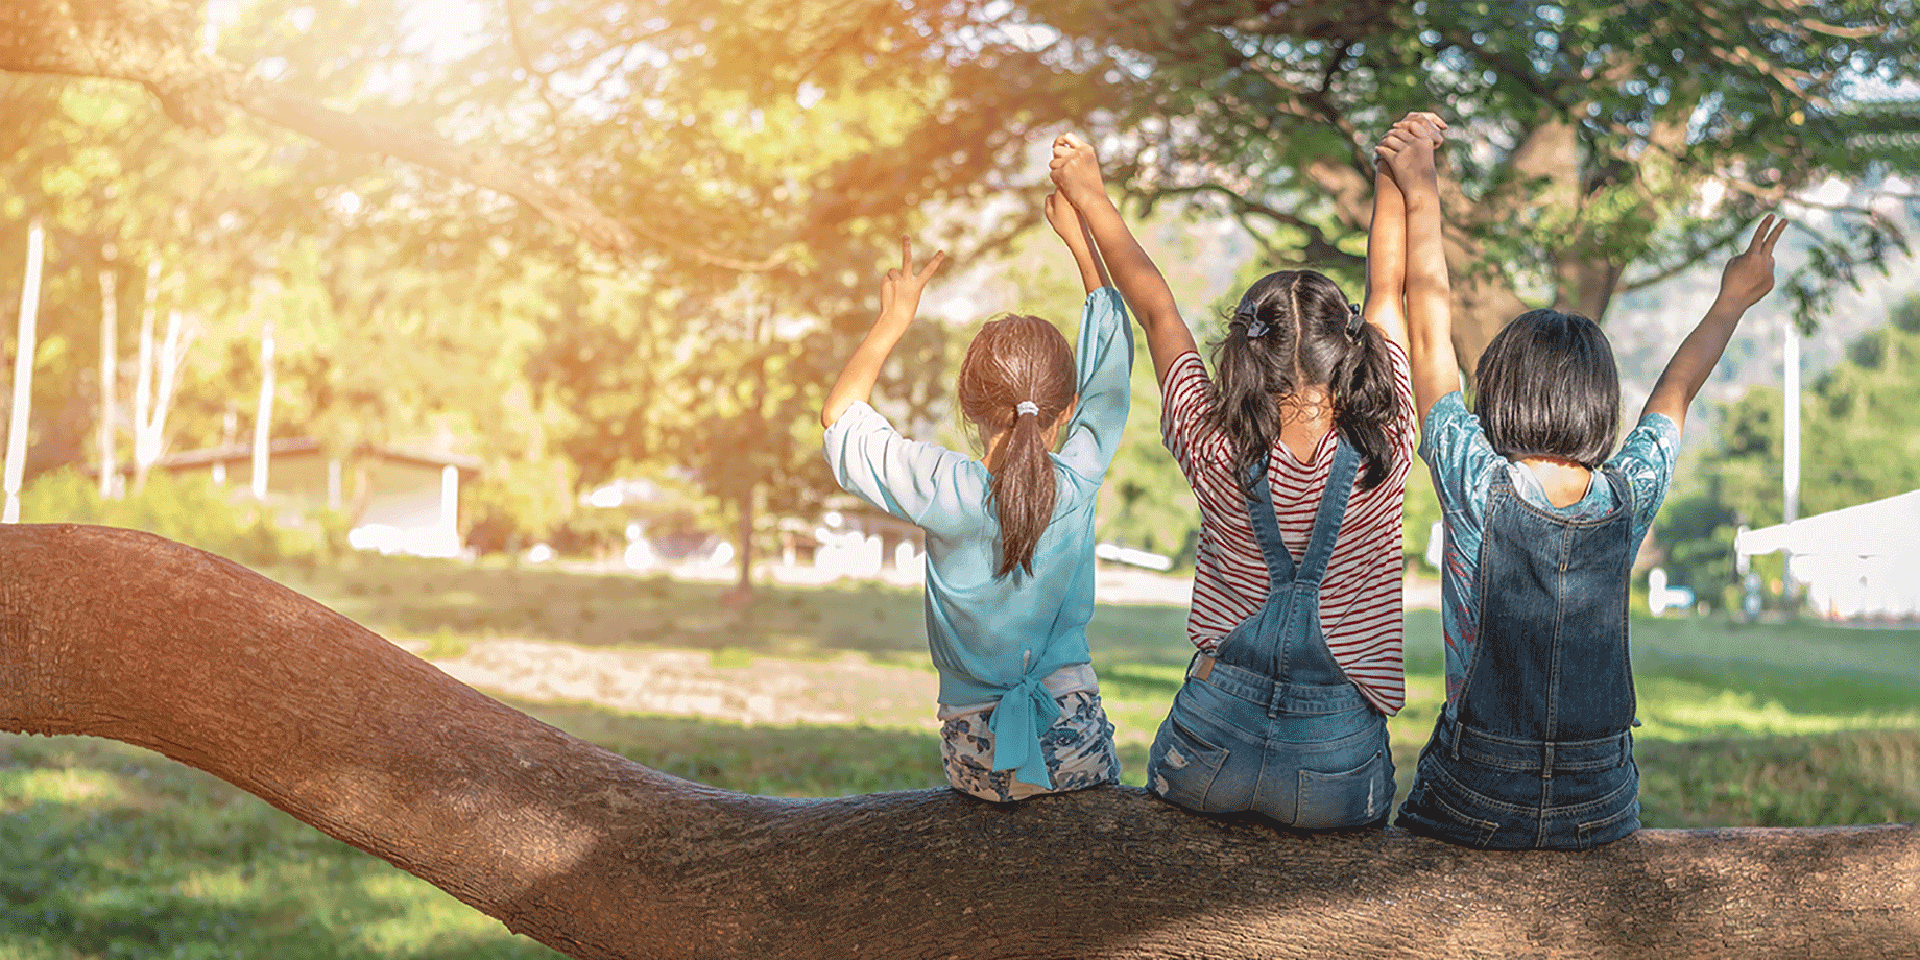 Children friendship concept with happy girl kids in the park having fun sitting under tree shade playing together enjoying good memory and moment of student lifestyle with friends in school time day